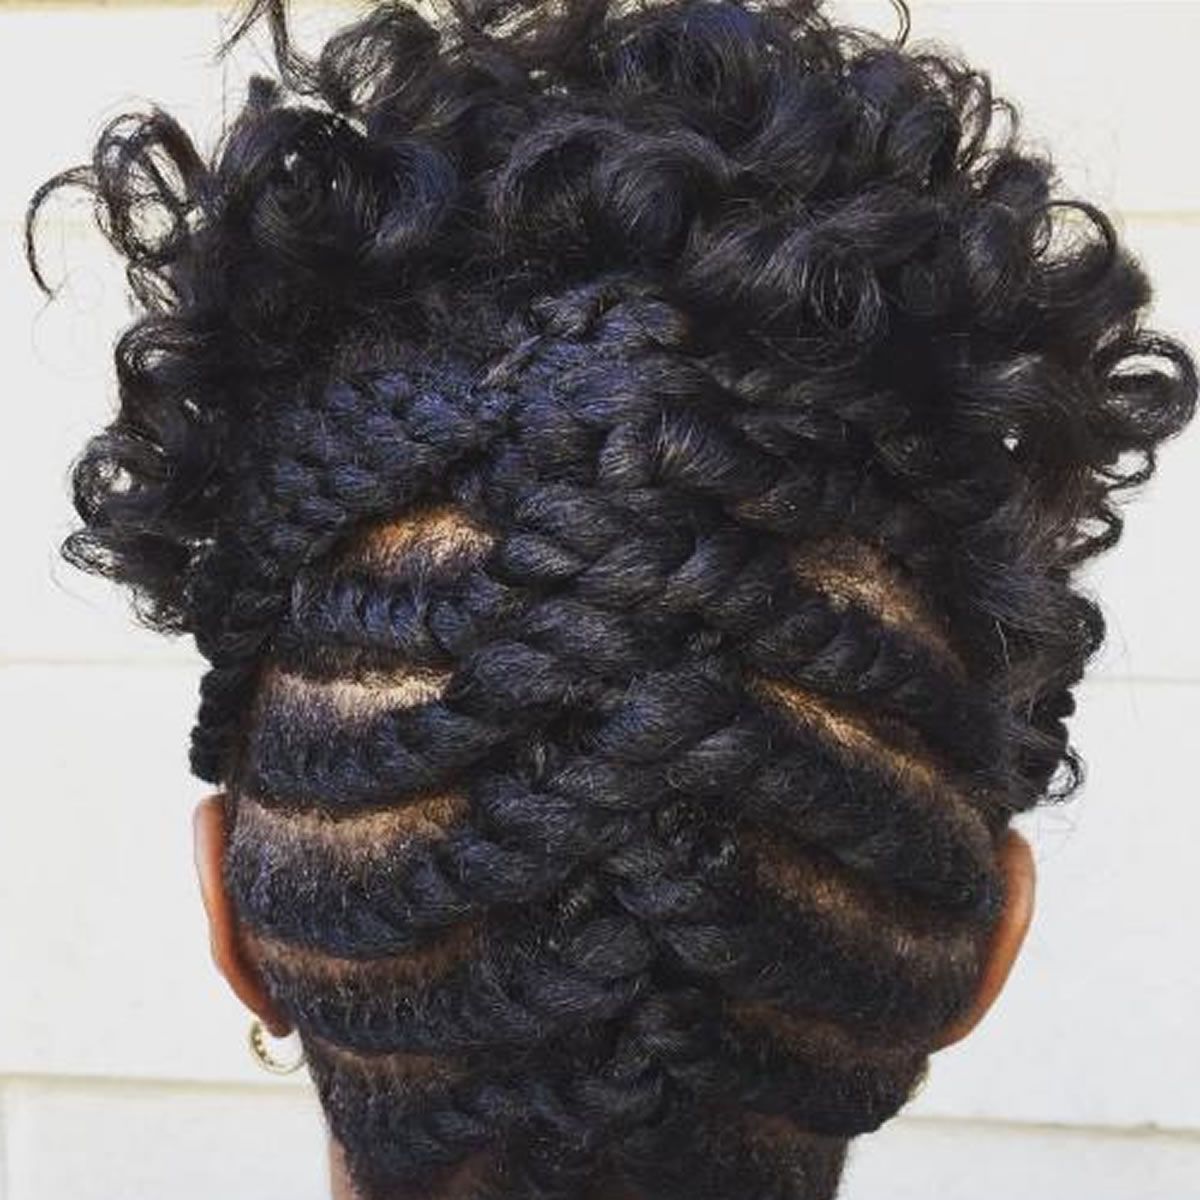 Fabulous African American Braided Mohawk Hairstyles With Intended For Most Up To Date Braided Mohawk Hairstyles With Curls (View 19 of 20)